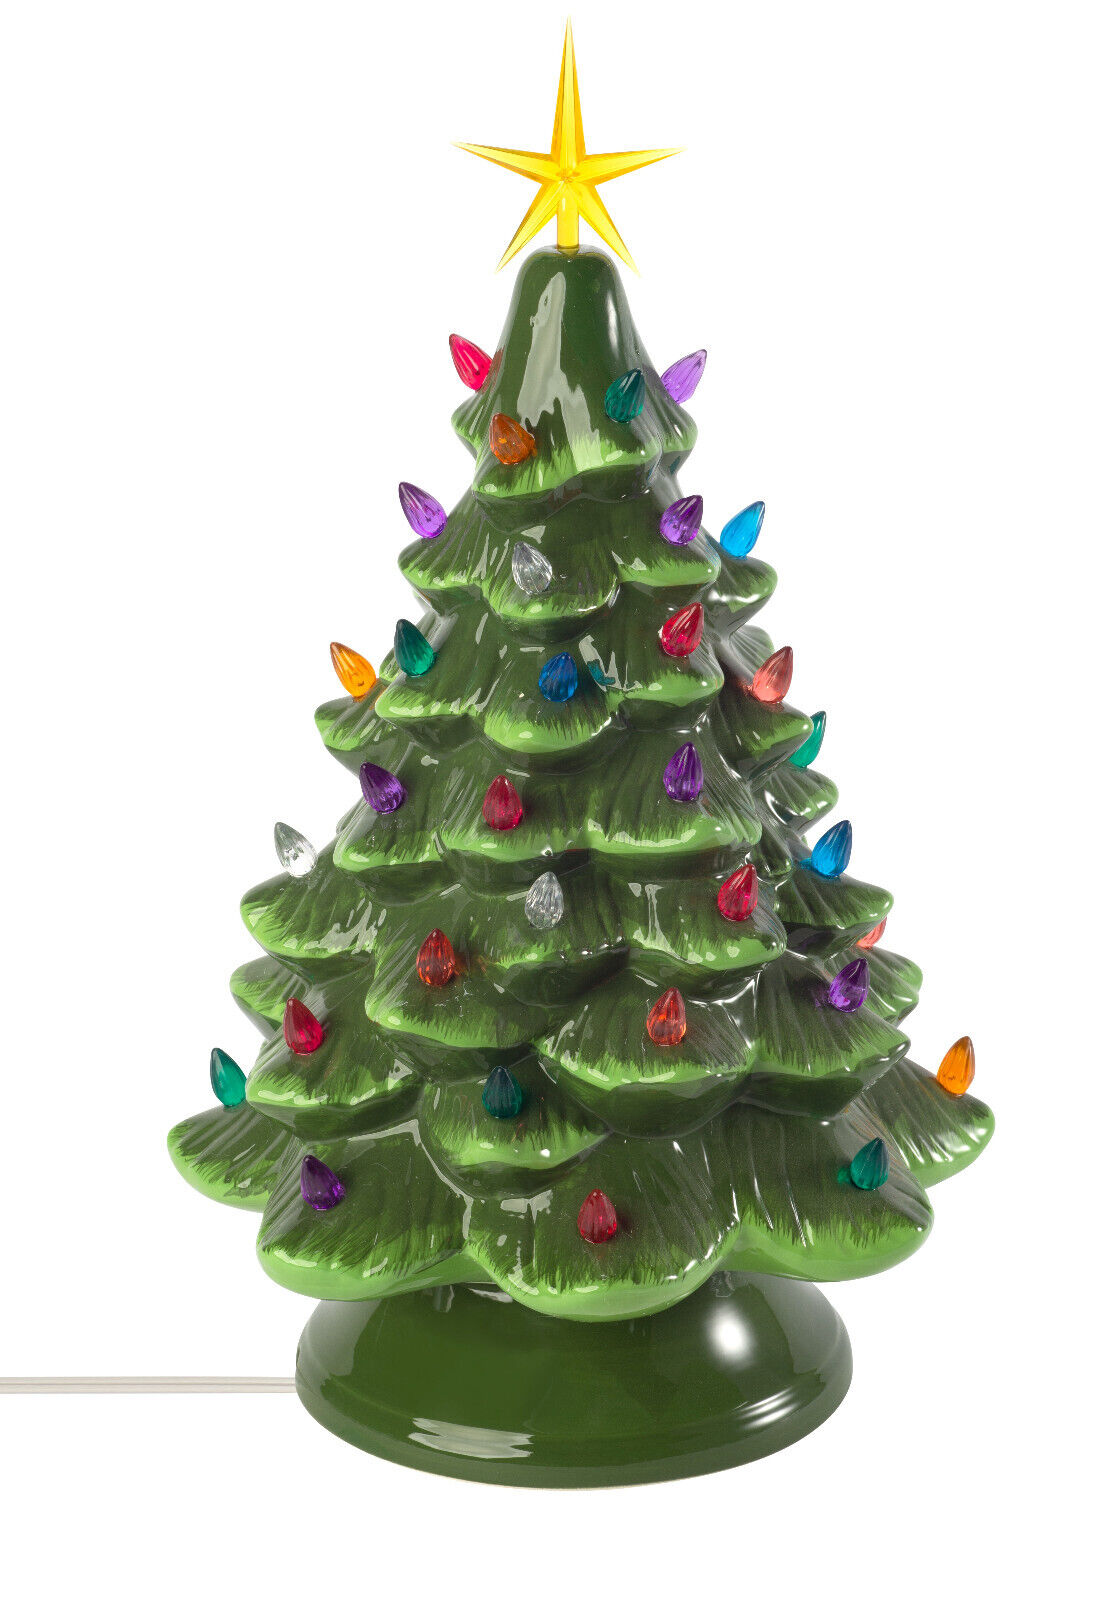 Classic Ceramic Christmas Tree – 15.5” Vintage Green Tree with Multicolor Lights